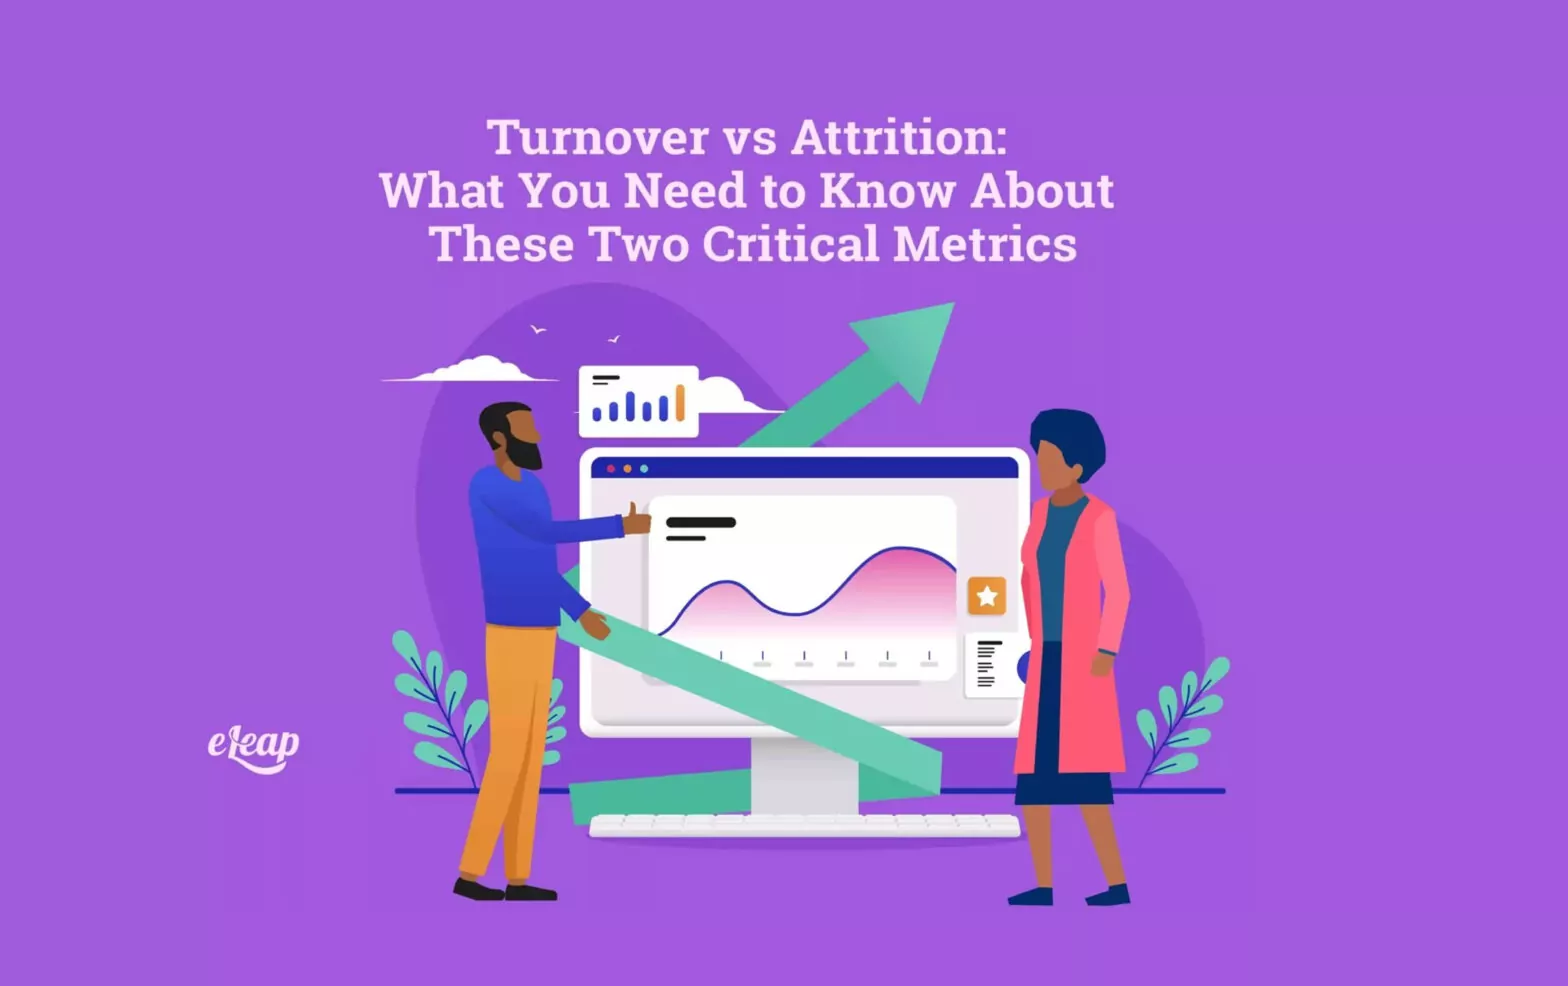 Turnover vs  Attrition: What You Need to Know About These Two Critical Metrics